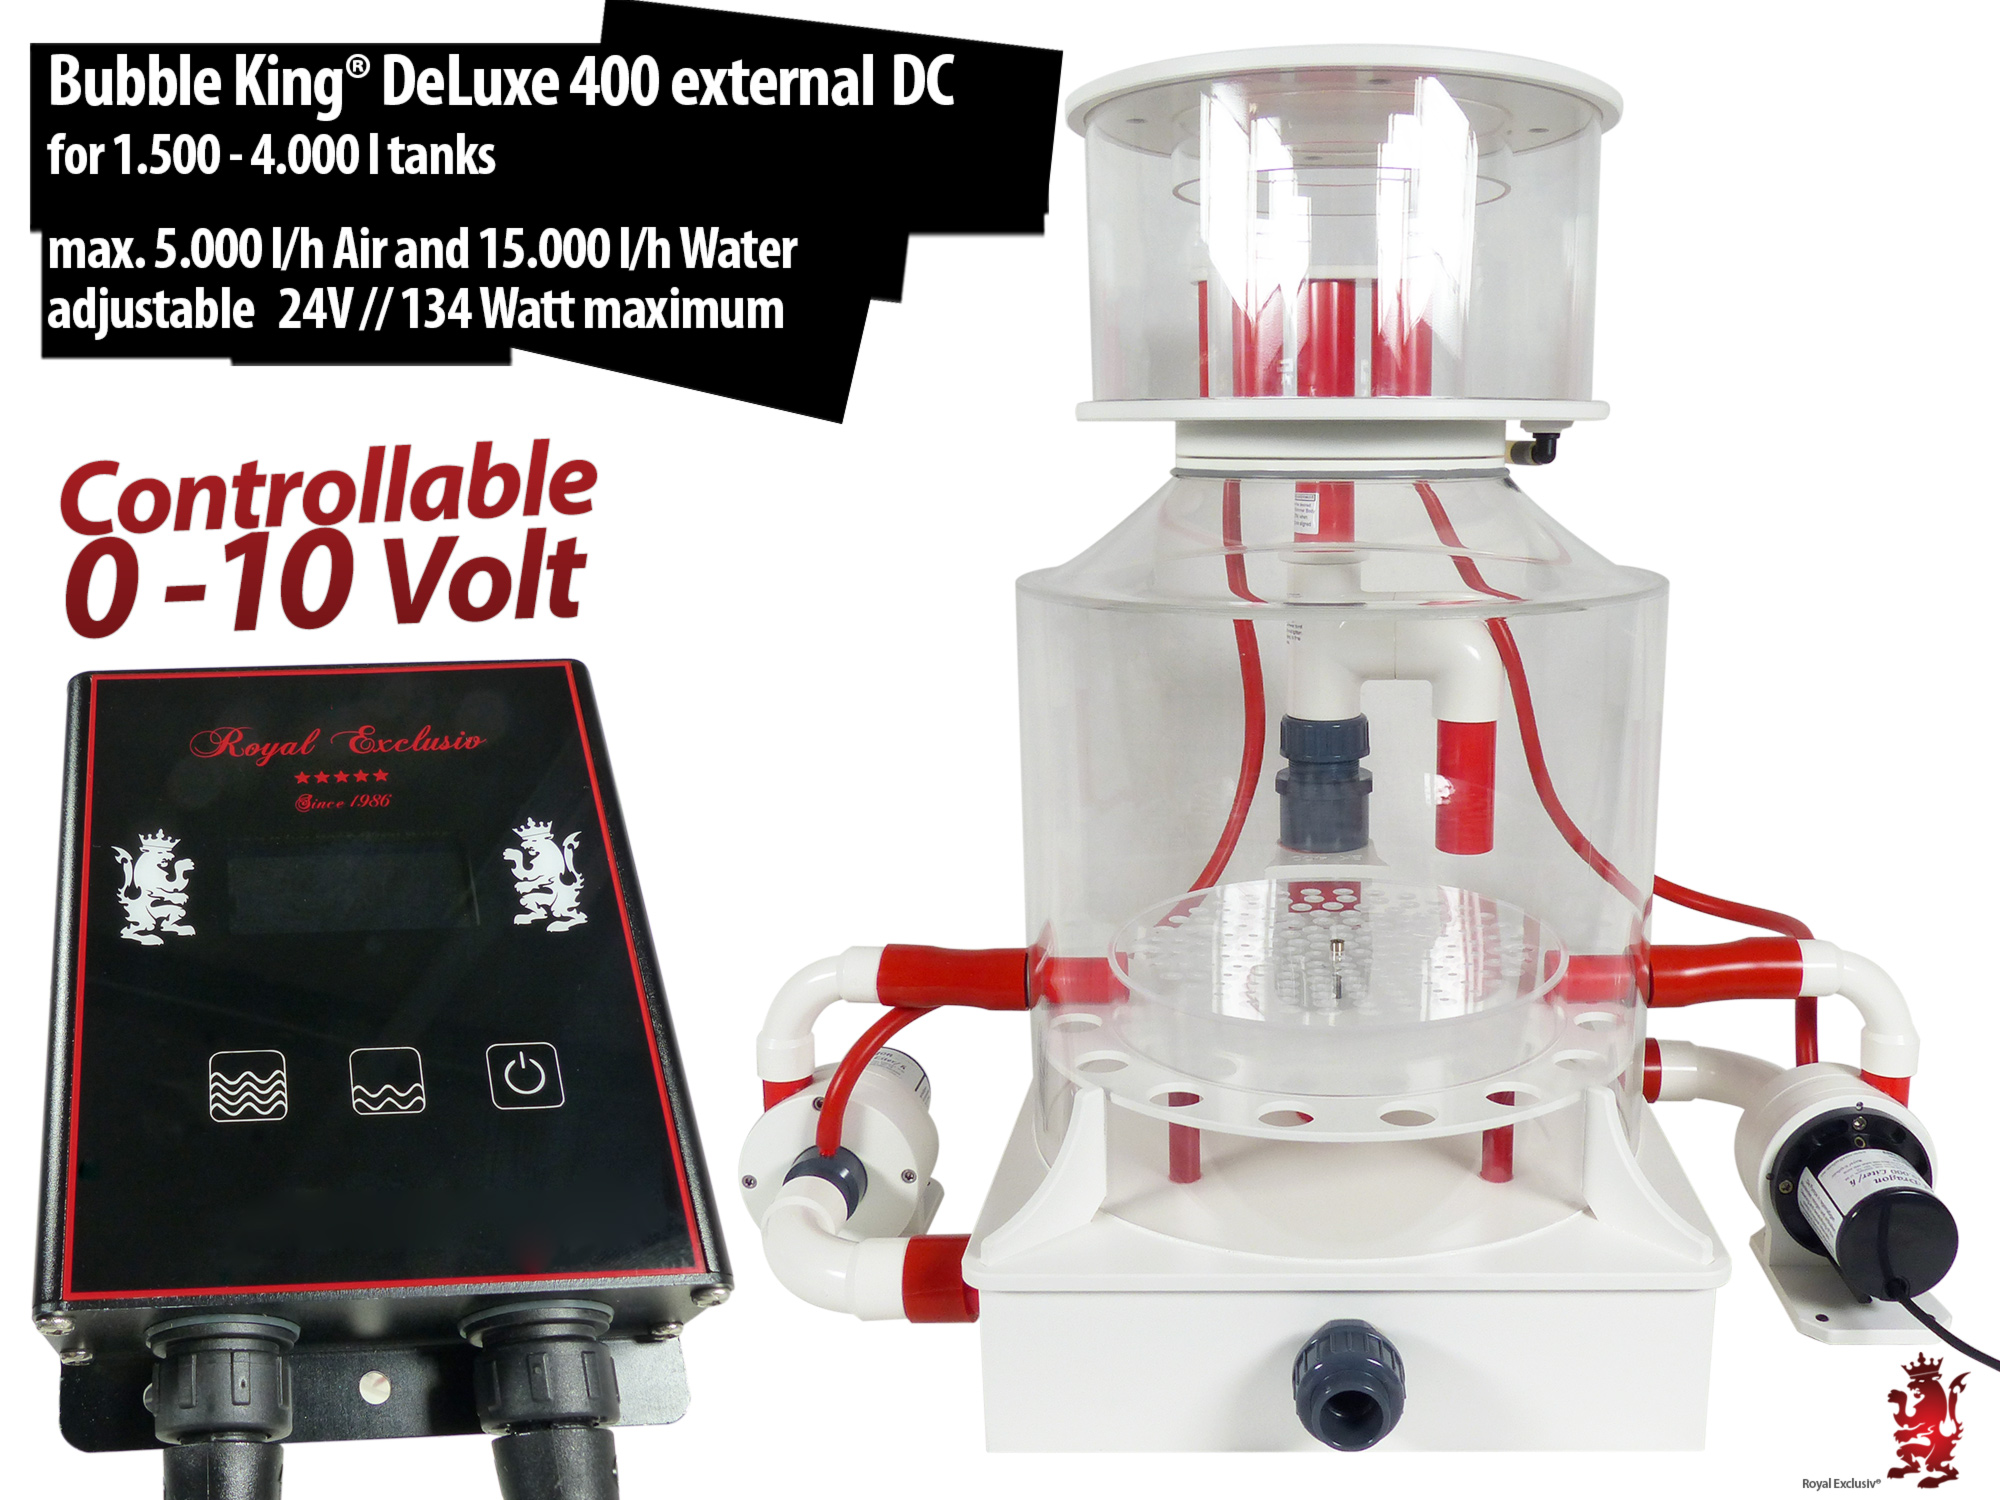 Royal Exclusiv Bubble King DeLuxe 400 extern 24V